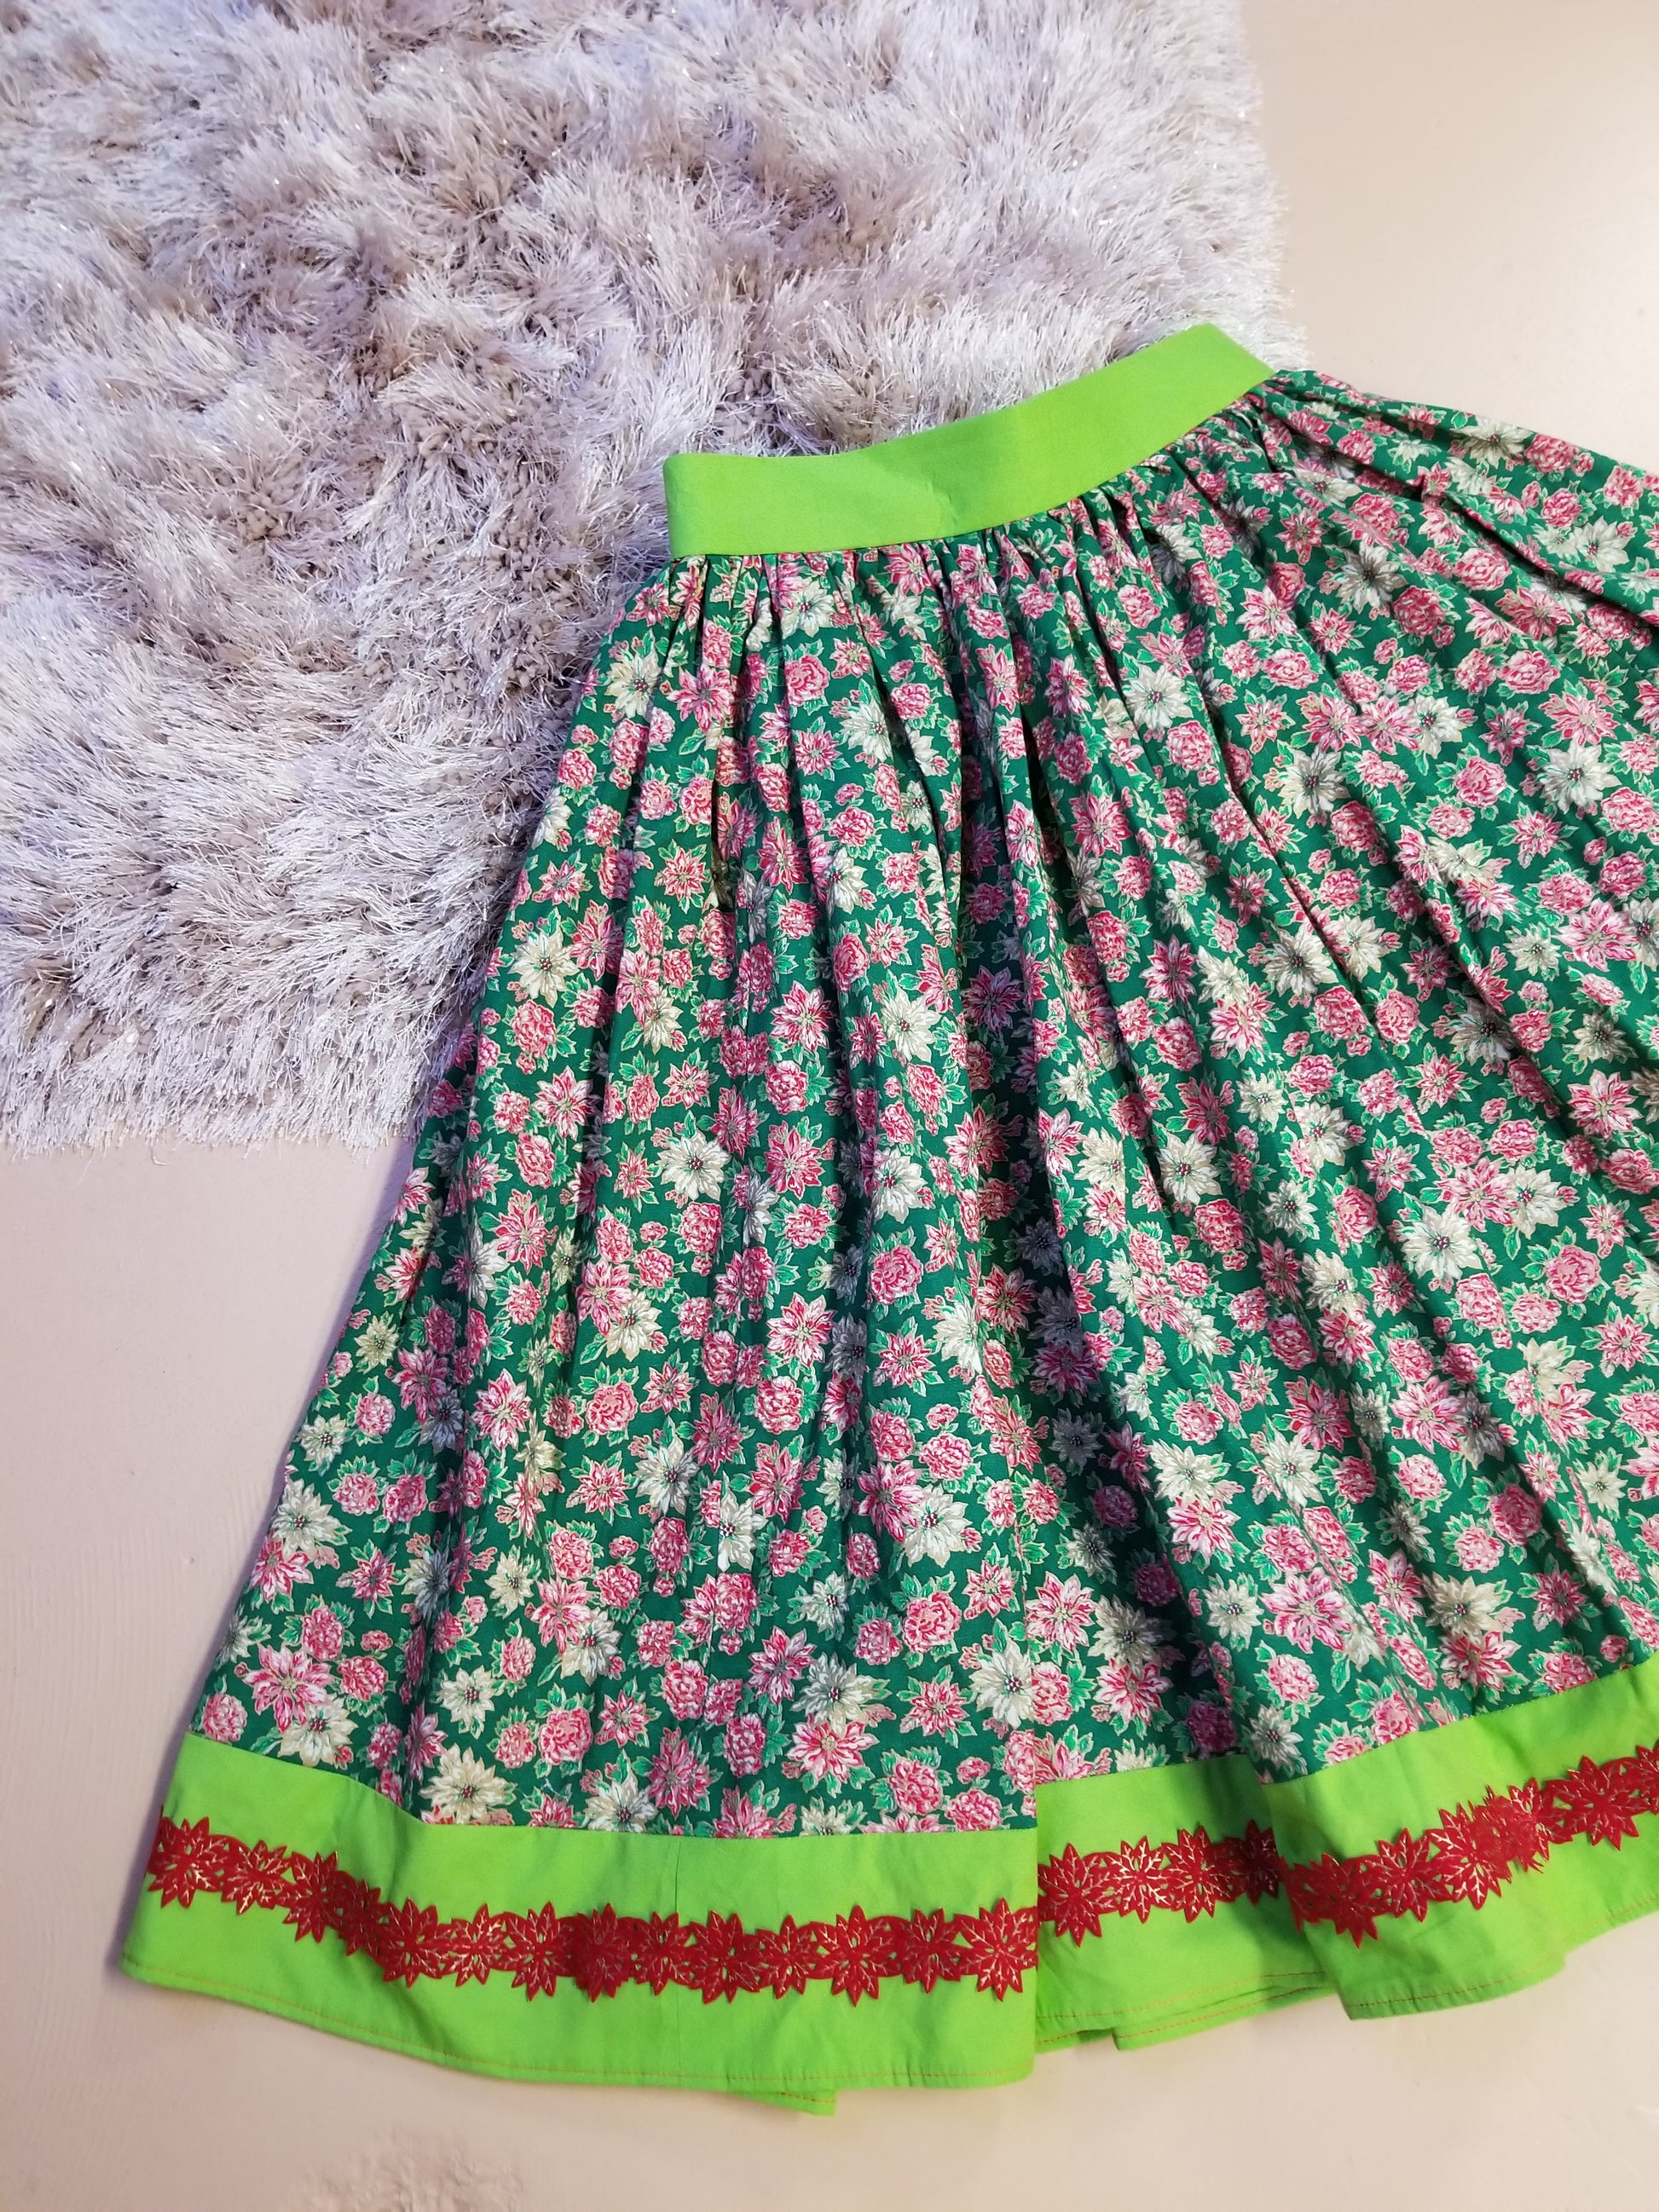 Poinsettia Holiday Skirt by Hollyville